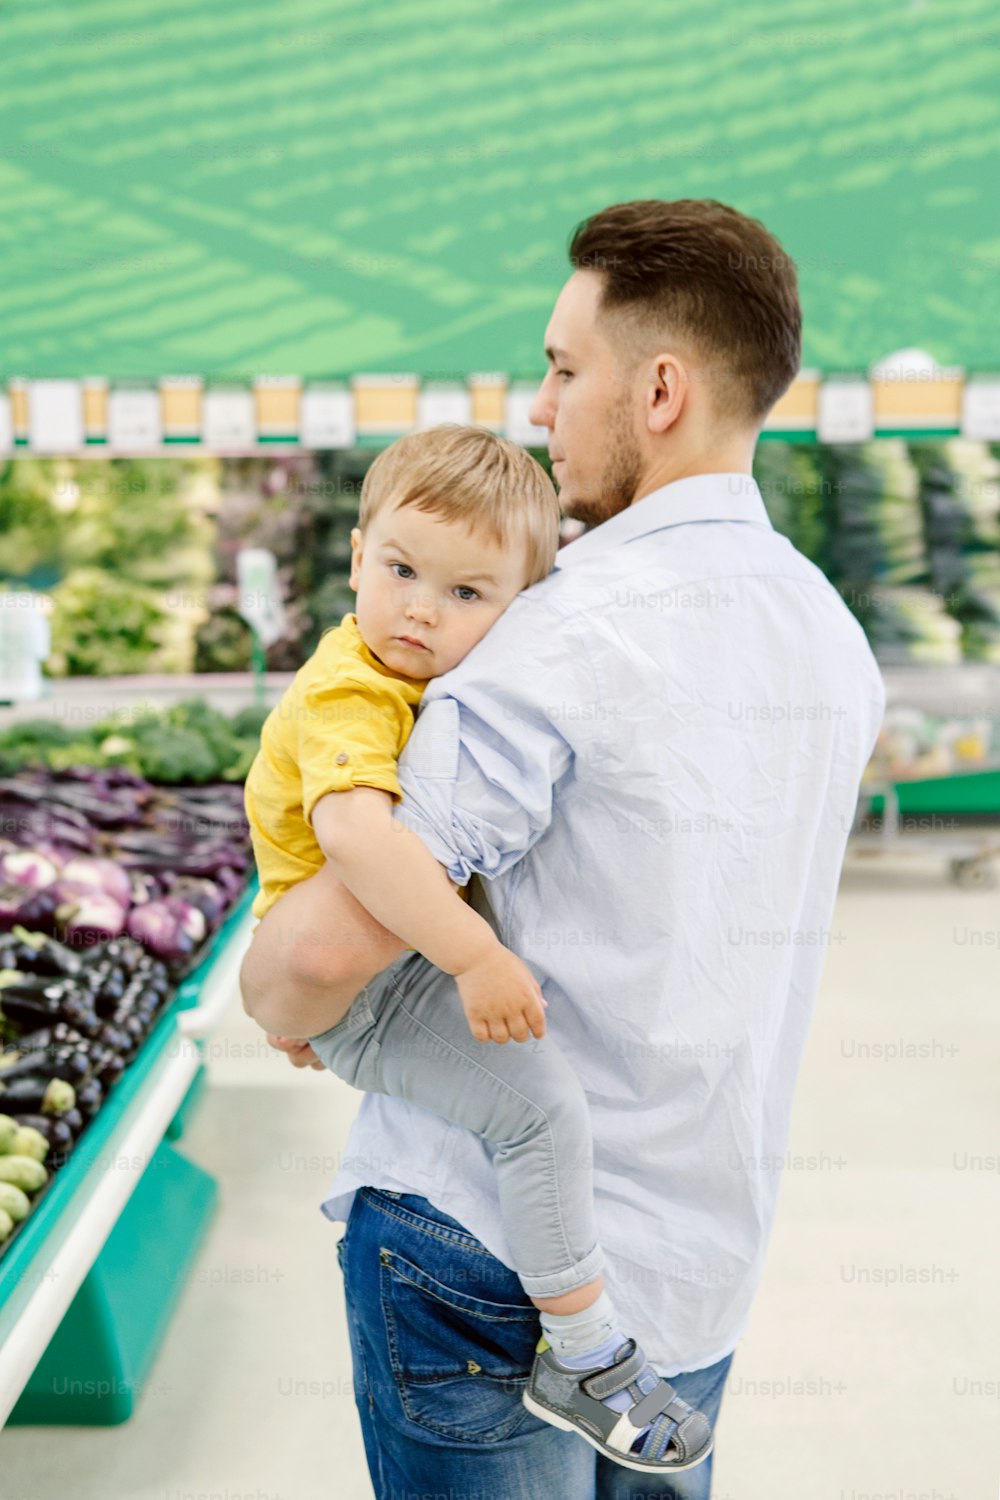 Caucasian father shopping in grocery store with baby son. Dad buying fresh vegetables. Man parent with toddler kid choosing healthy meal for snack lunch. Lifestyle authentic candid moment.